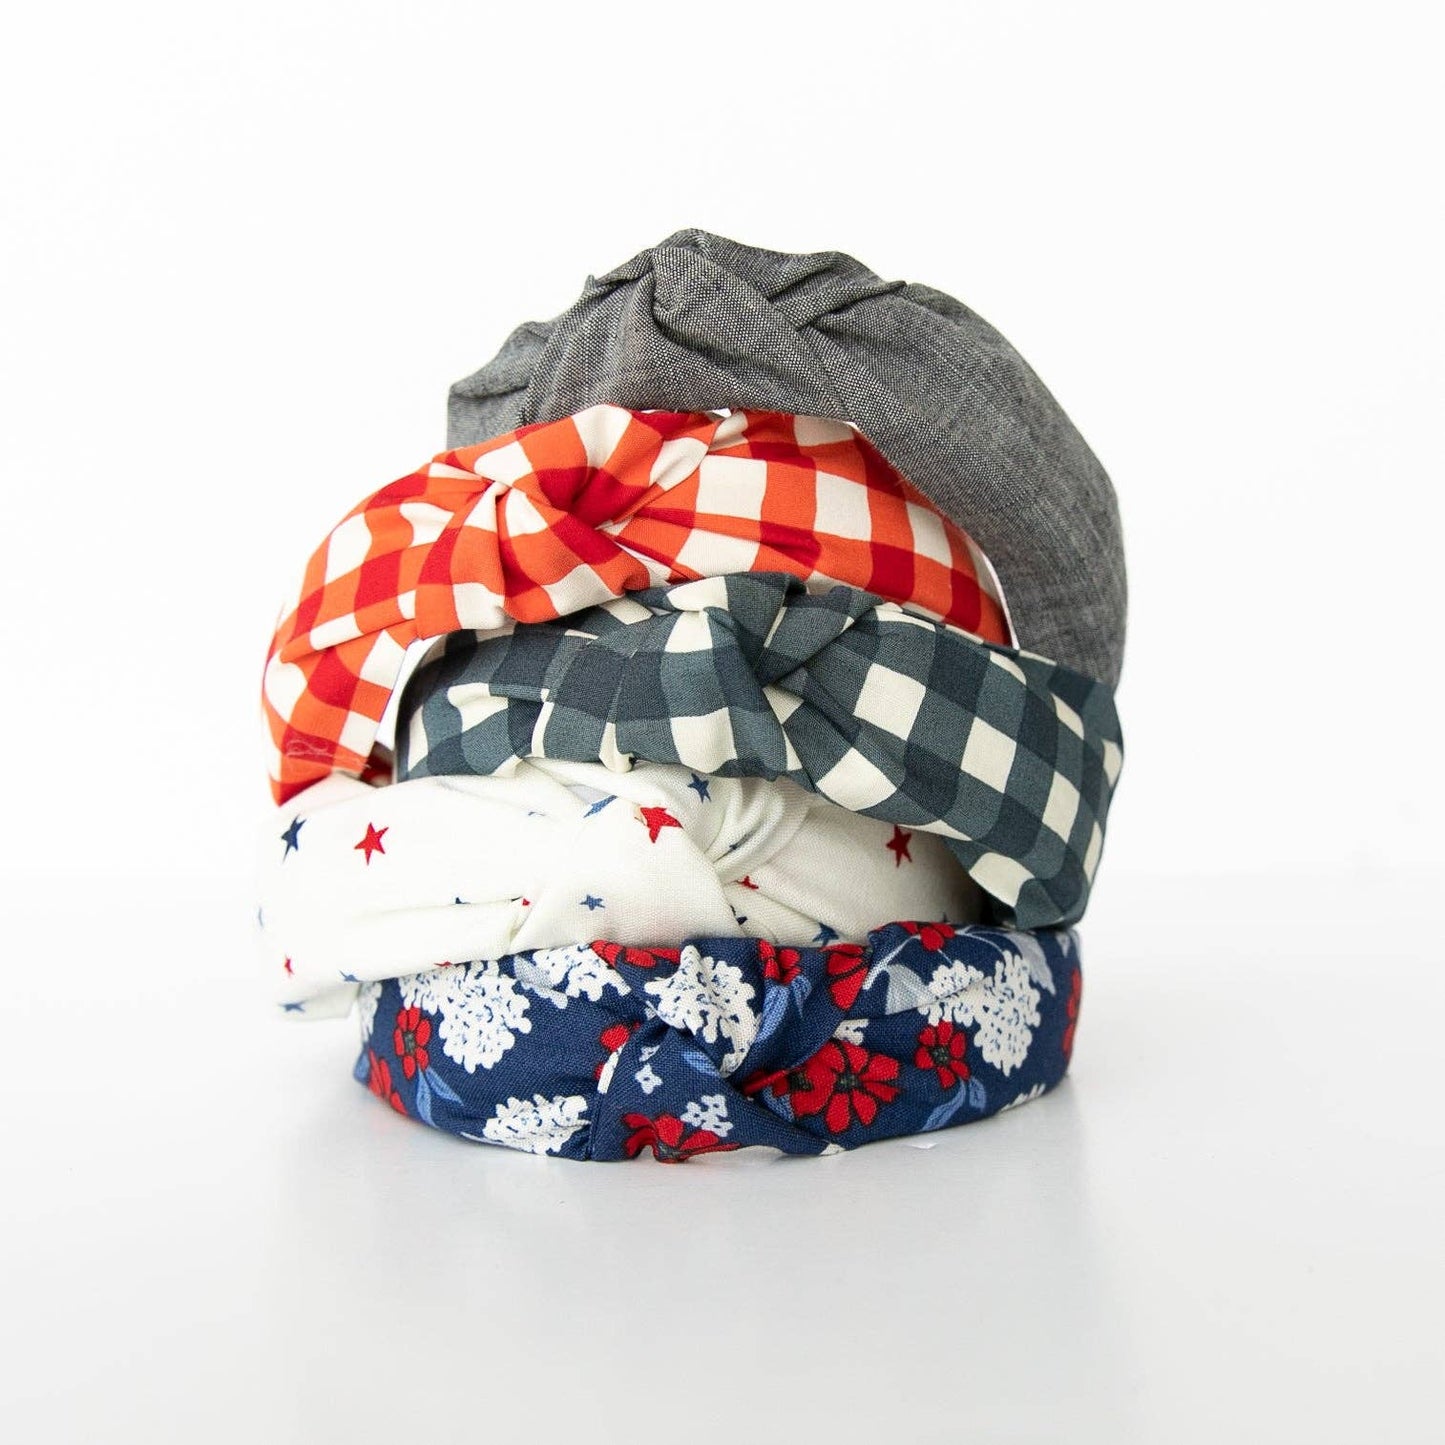 Red Gingham | Knotted Headband